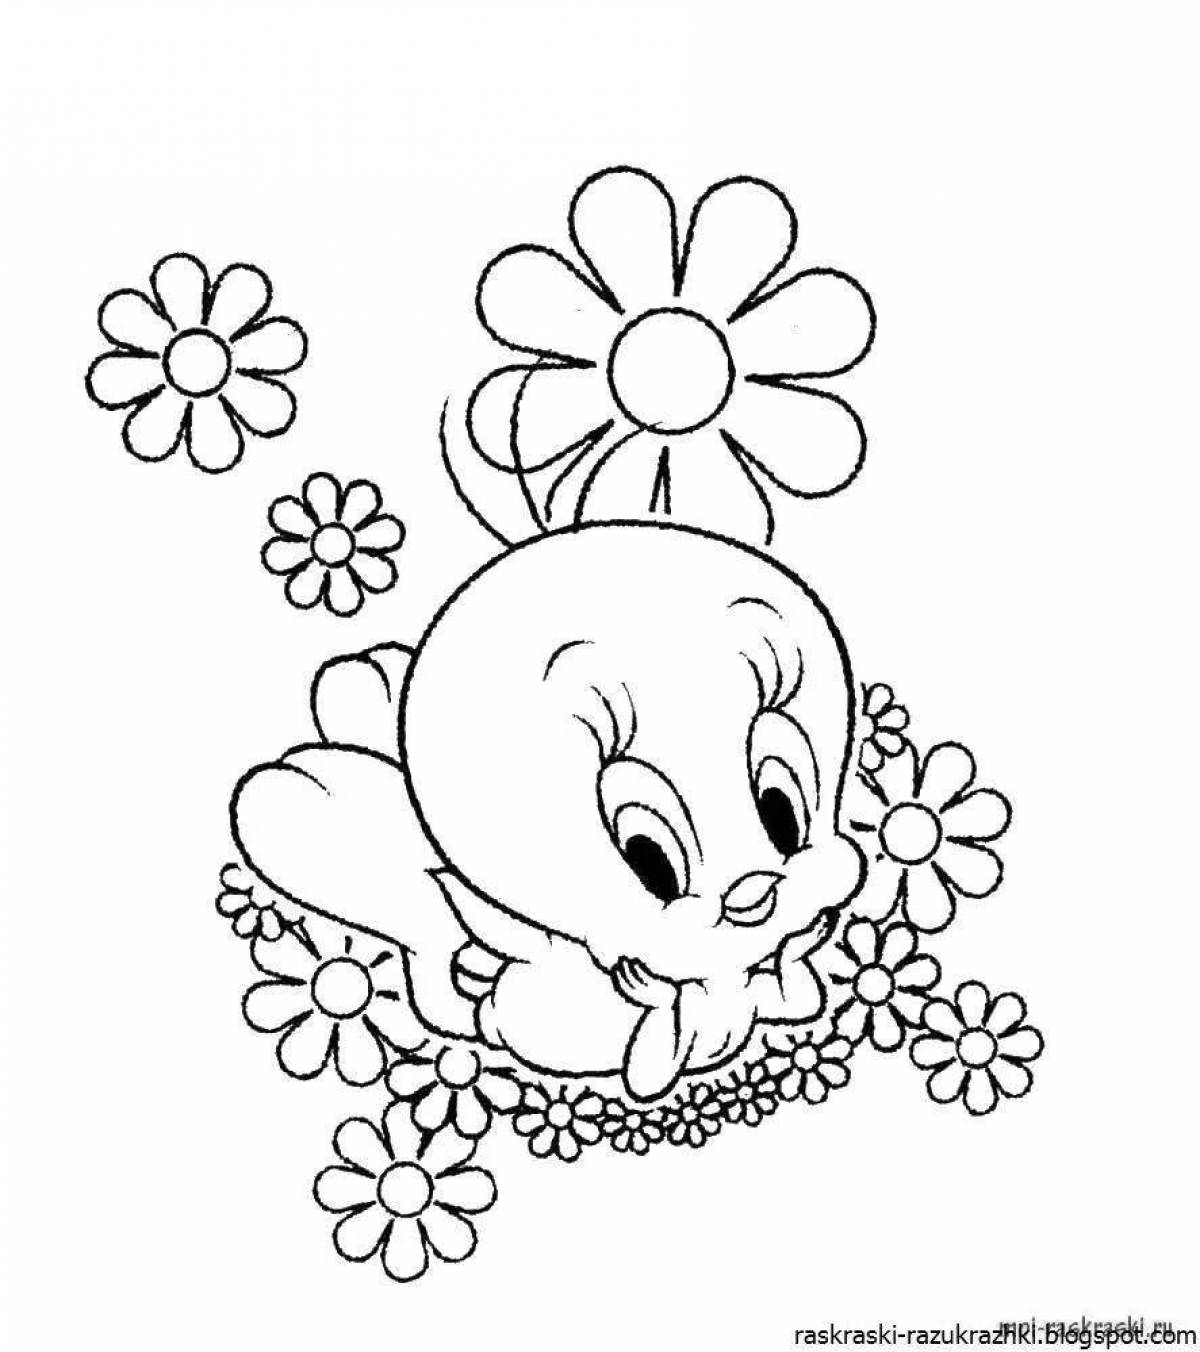 Exquisite duck coloring book for girls